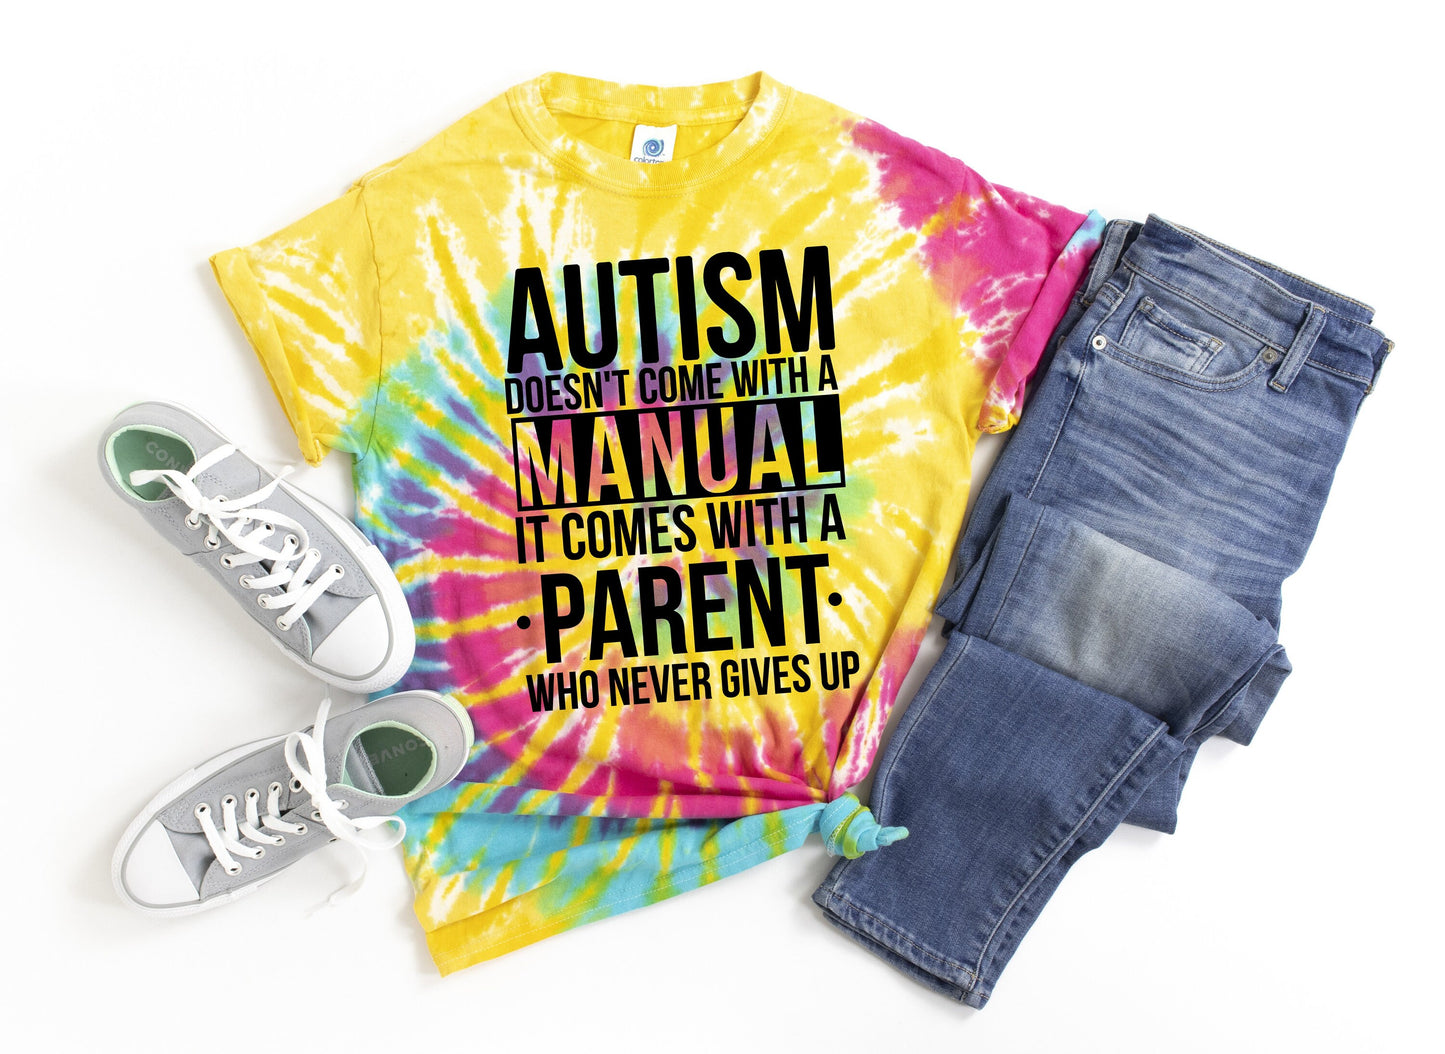 Autism Doesn't Come with a Manual Tie Dye t-shirt - Kids and Adults Sizes - Autism Mom Shirt - Autism Awareness - Autism Support